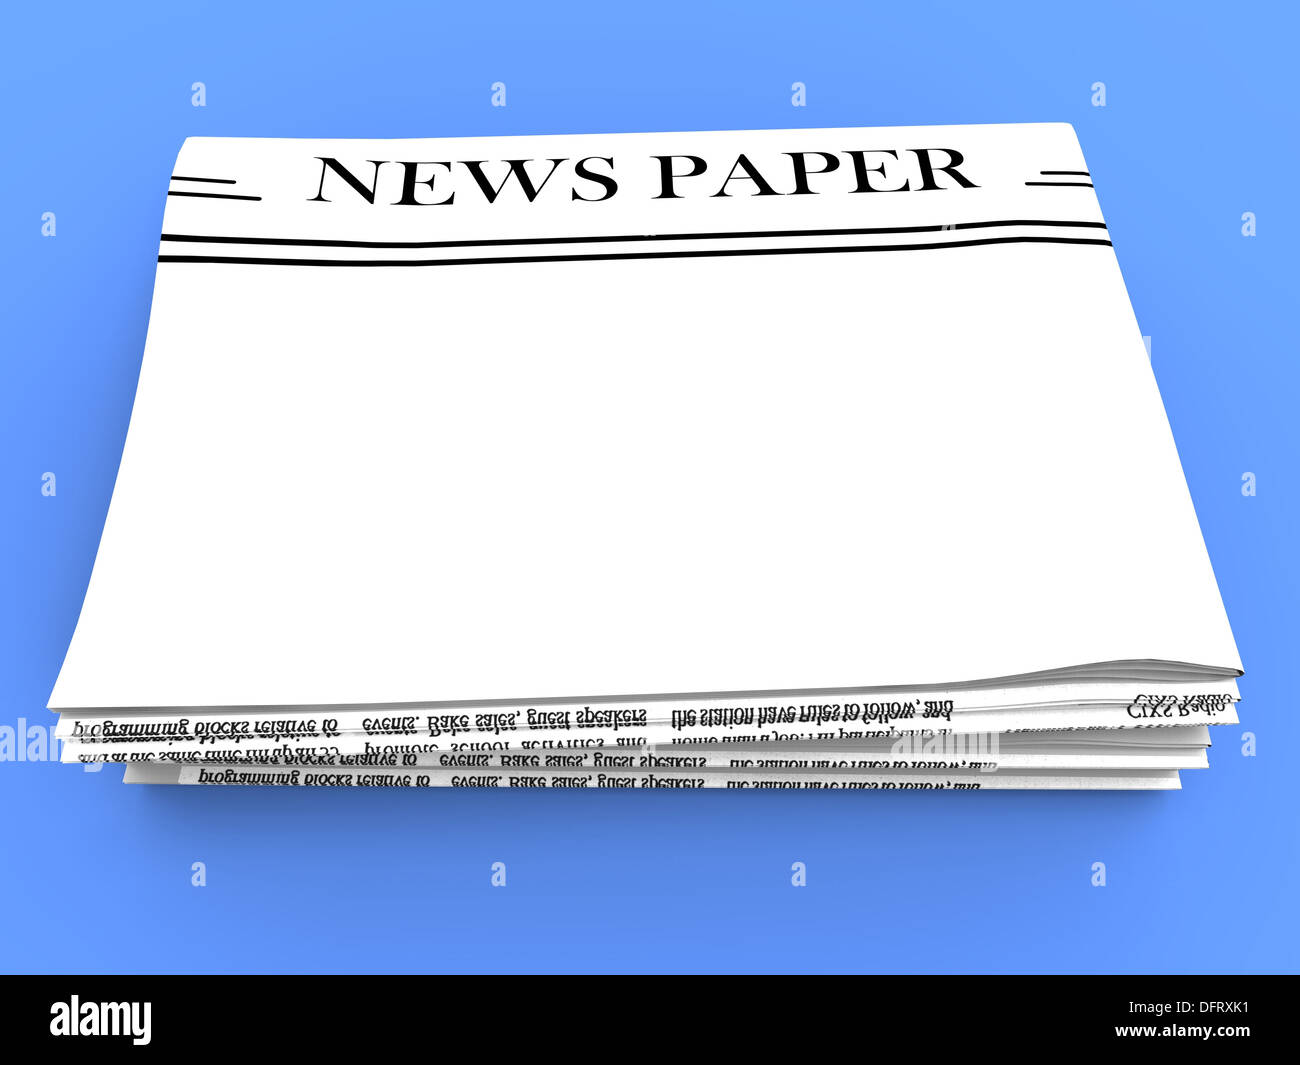 Blank Newspaper With Copy Space Showing News Media Headline Stock Photo ...